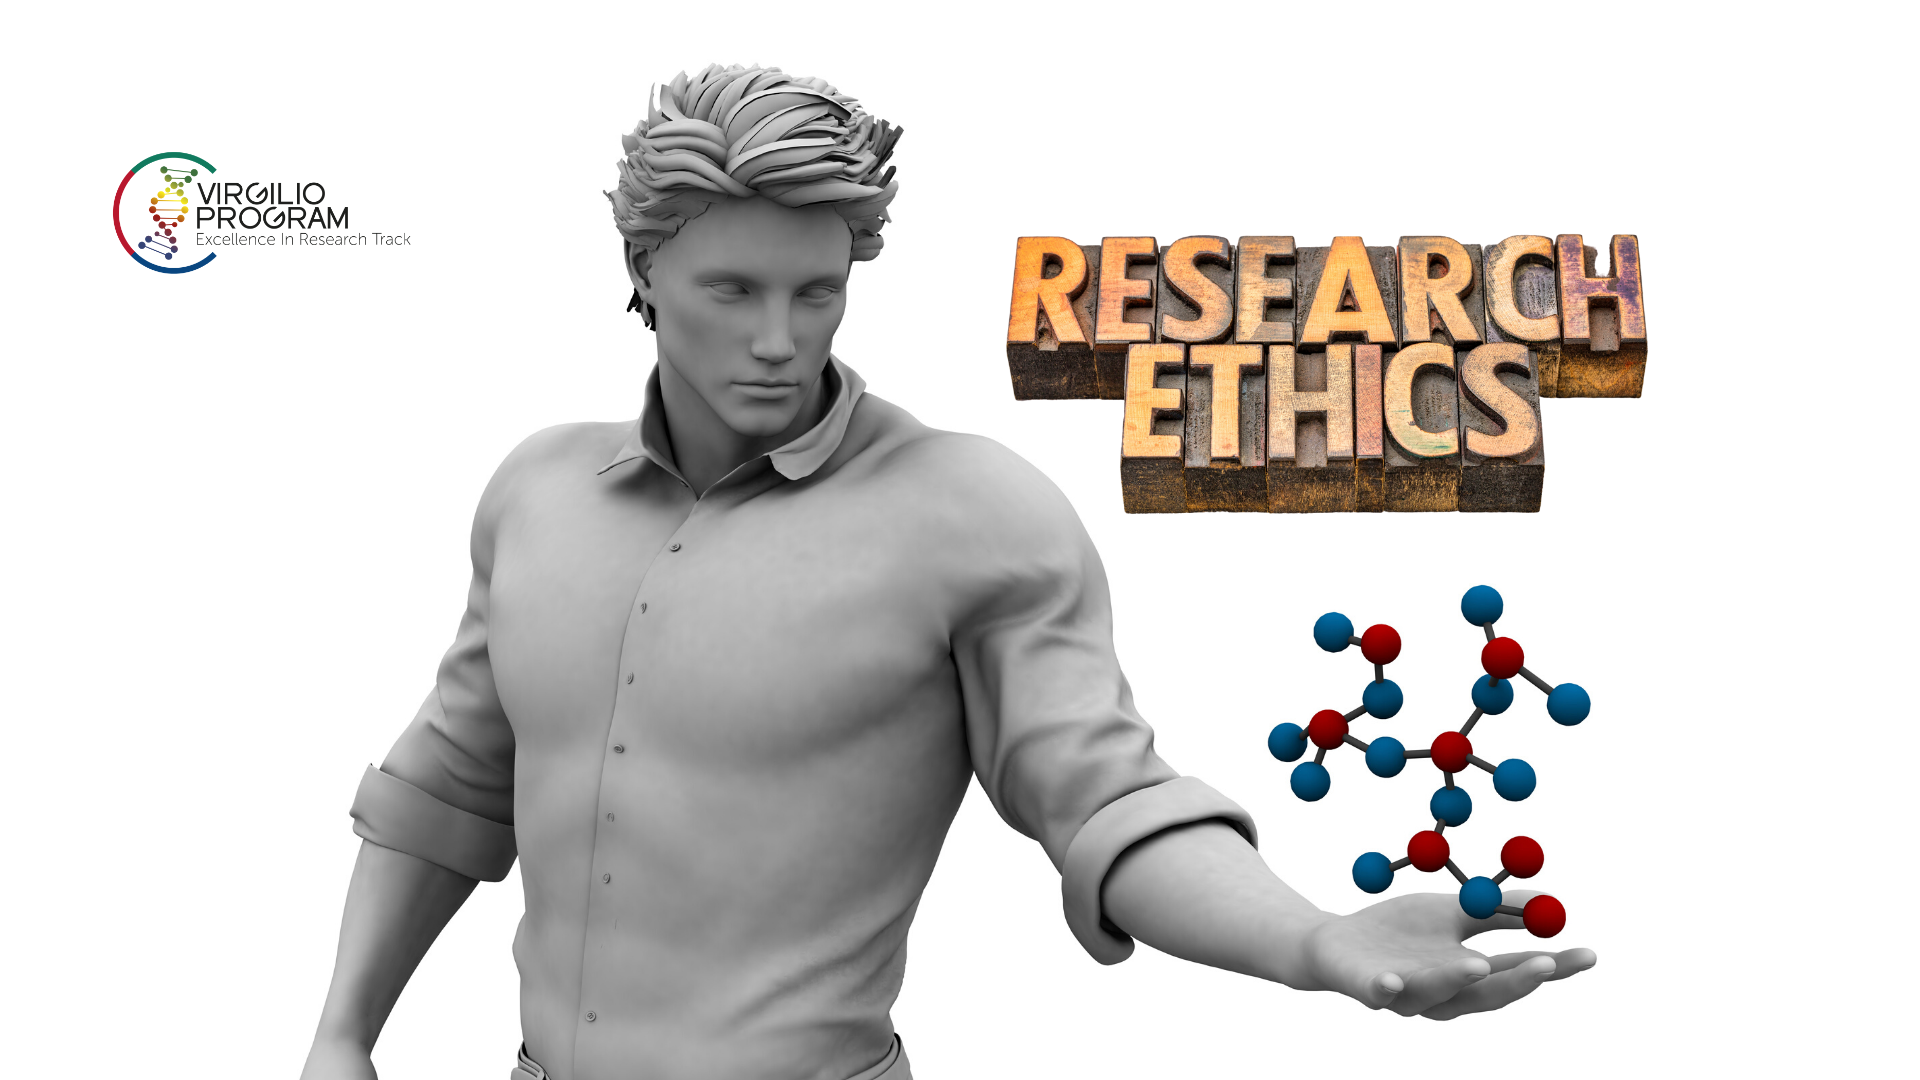 e learning course on research ethics